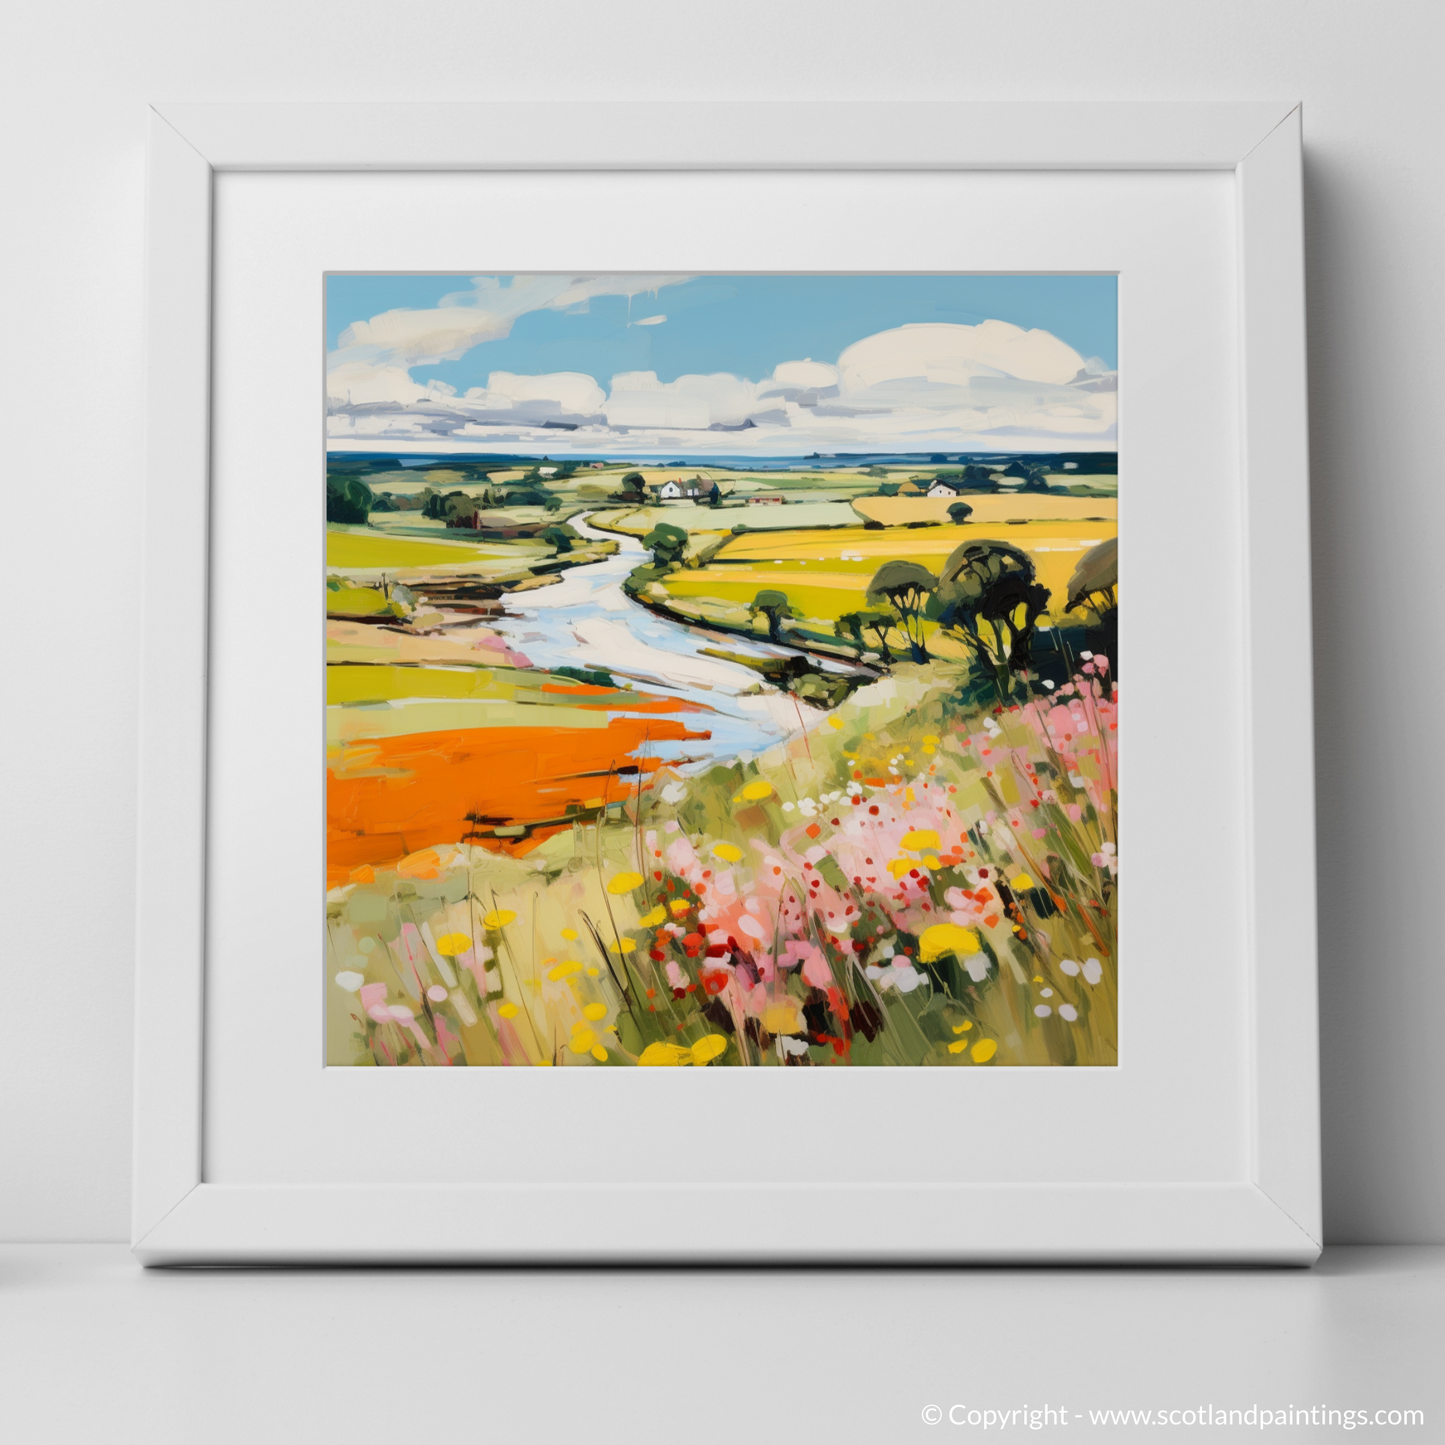 Art Print of Glenesk, Angus in summer with a white frame